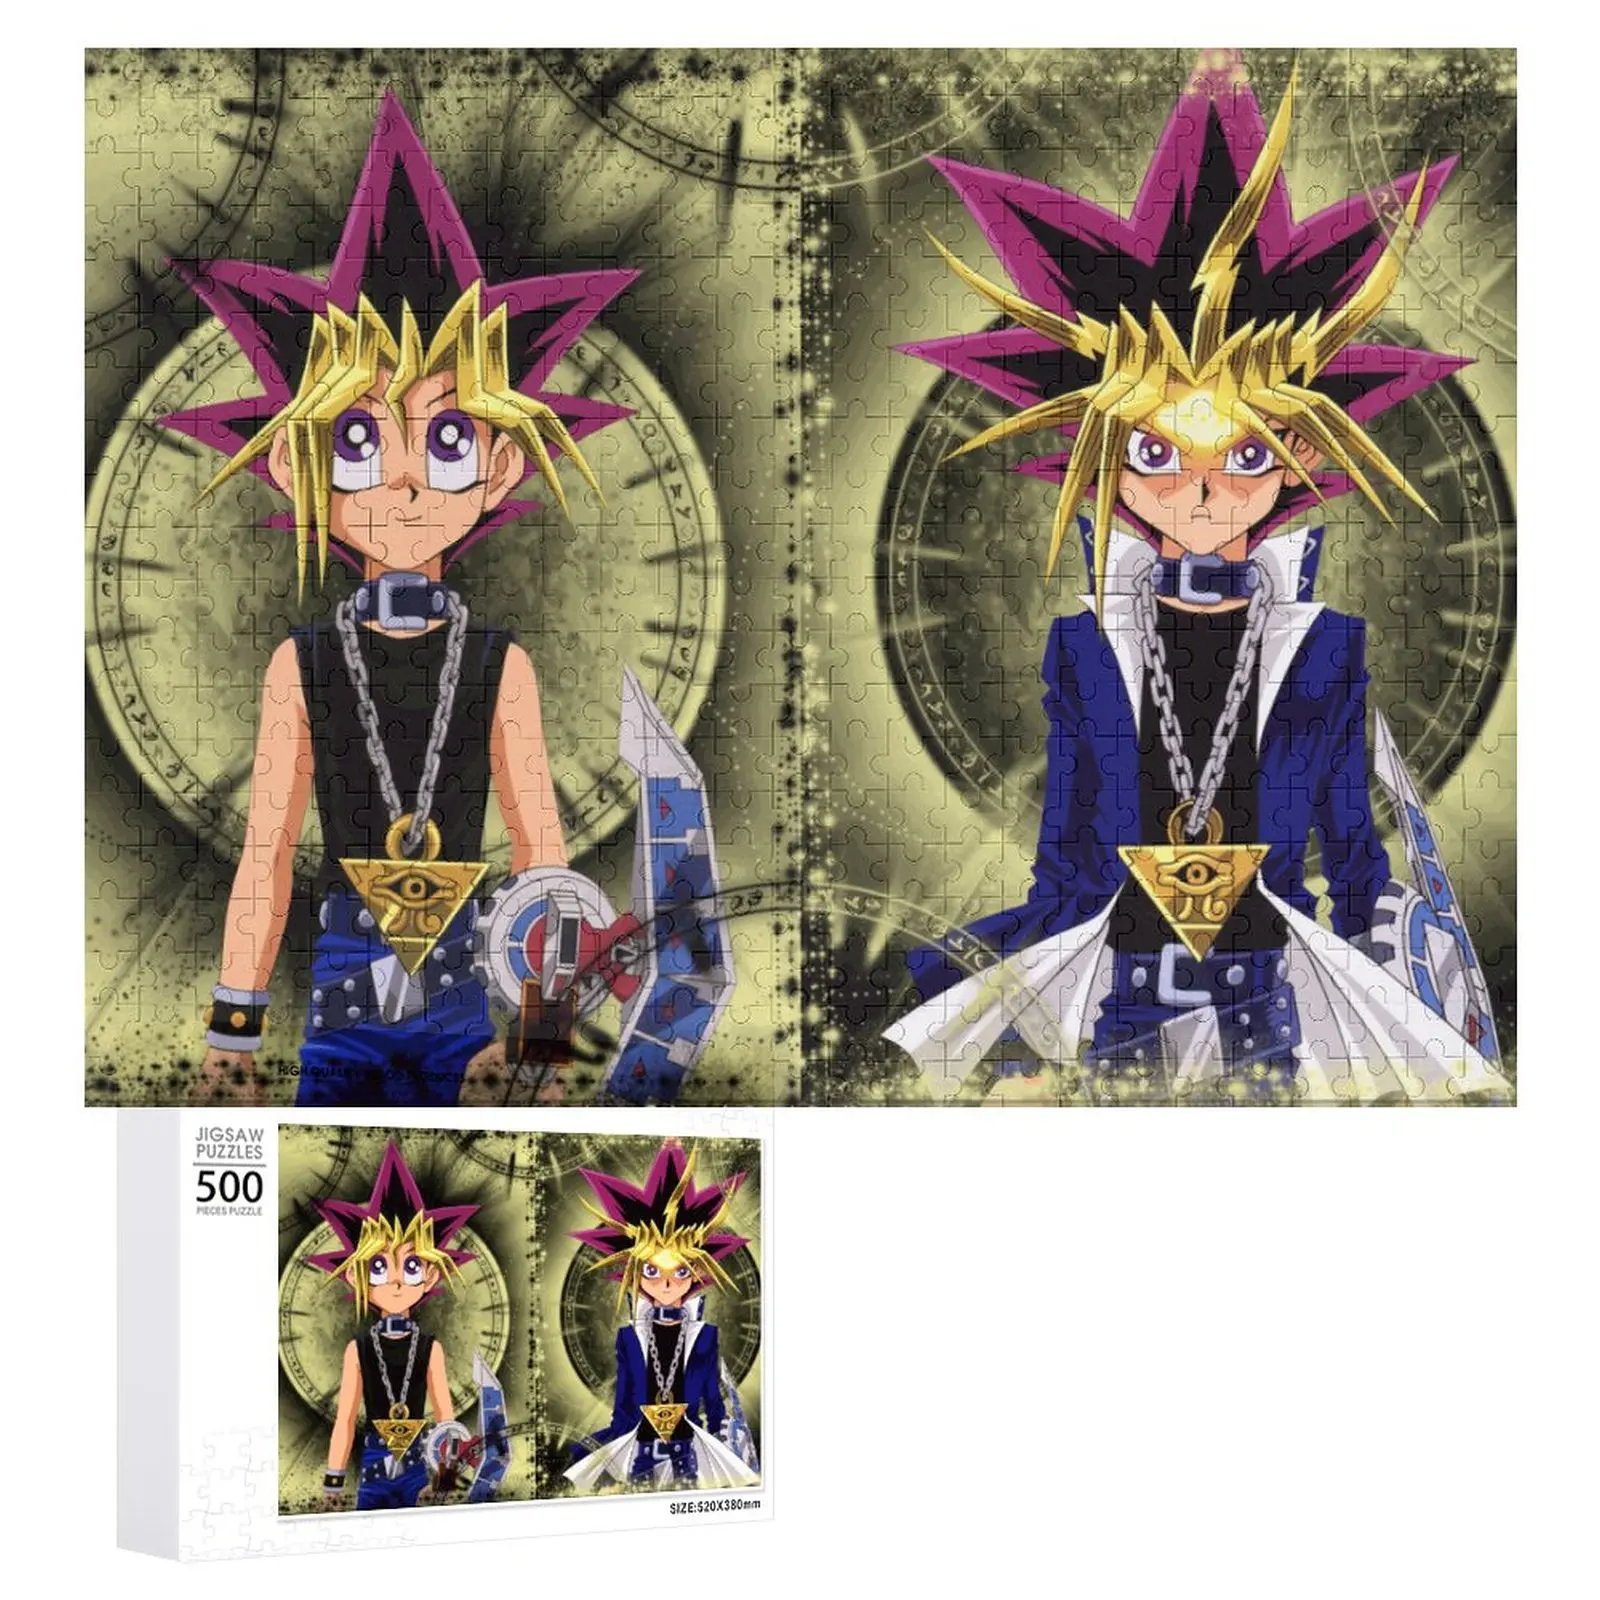 

Bandai Japanese anime Yu-Gi-King Duel Monster puzzle adult stress relief toy children's educational puzzle game 300/500 pieces